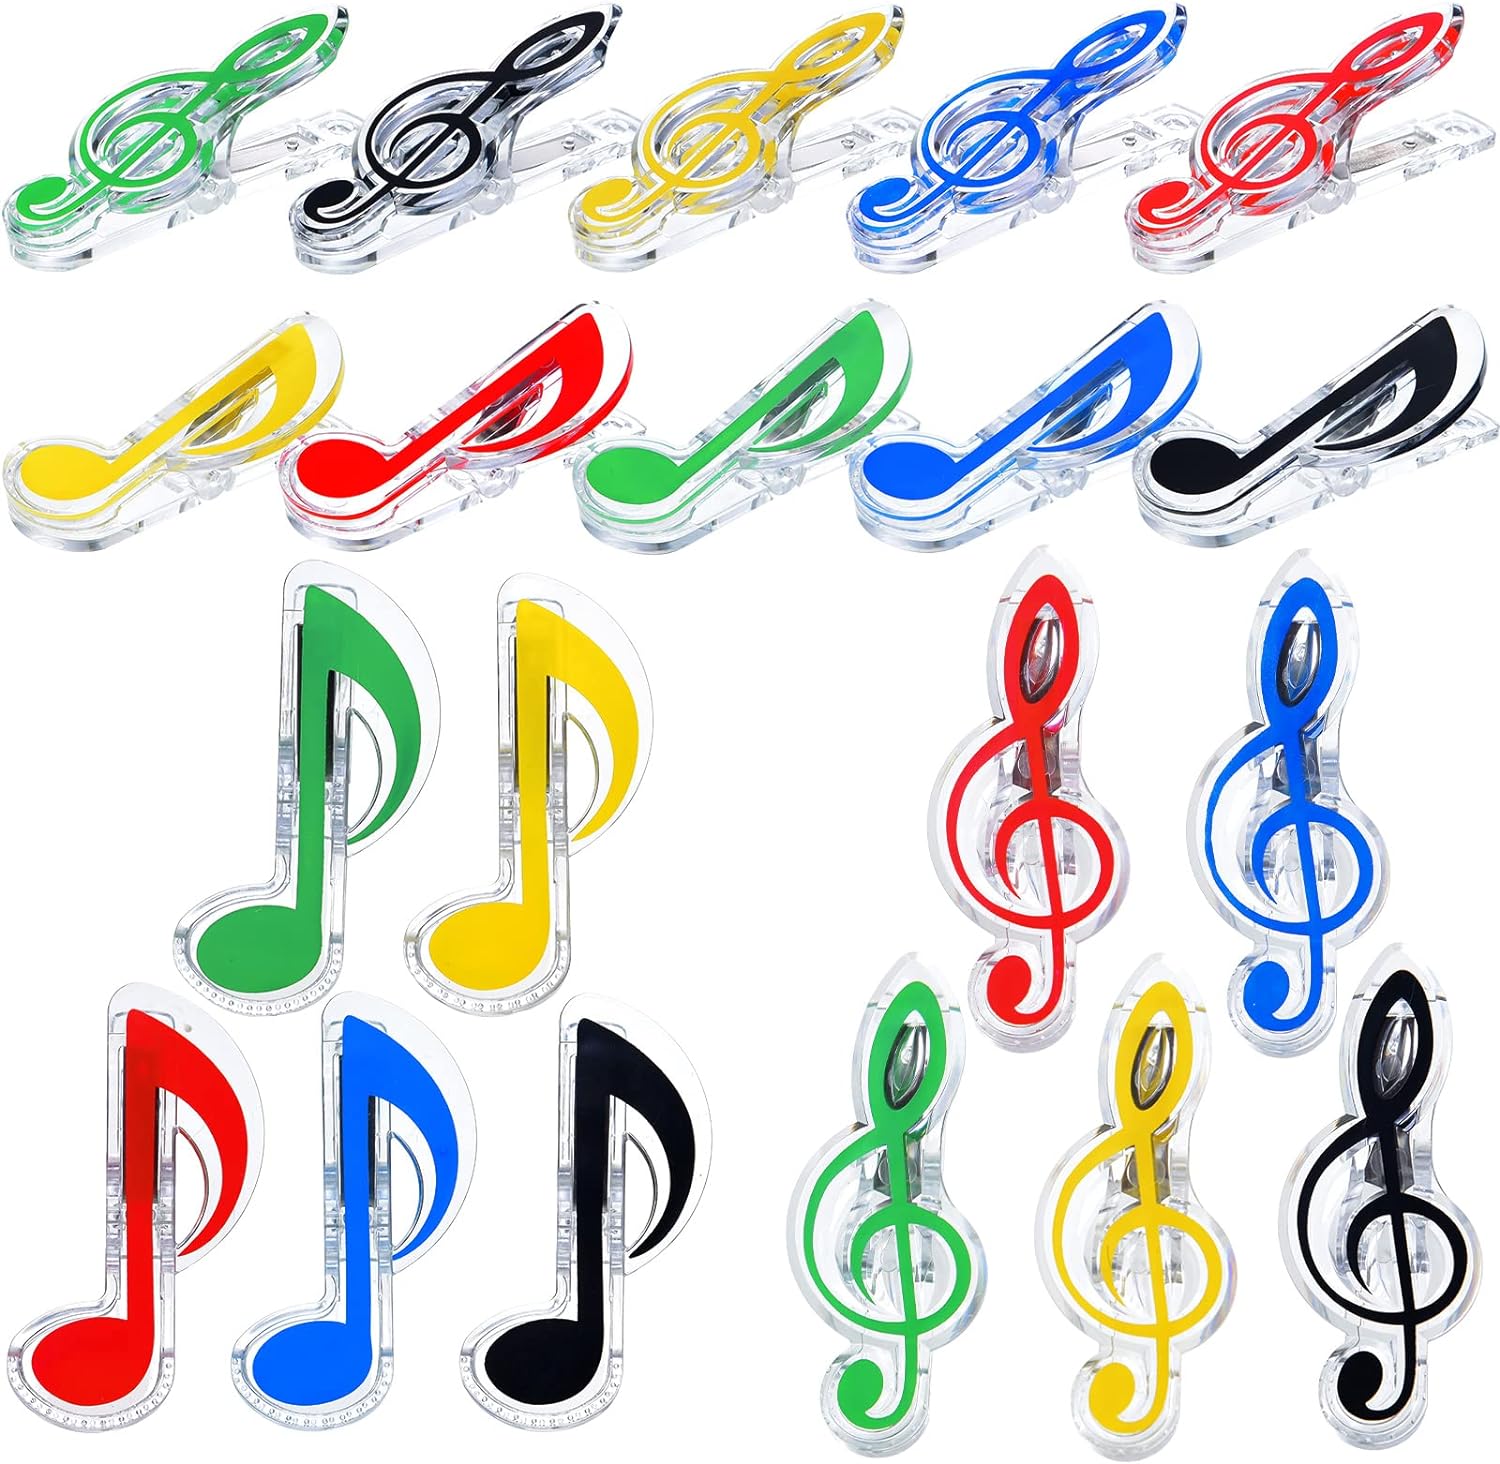 violin gifts - big paper clips